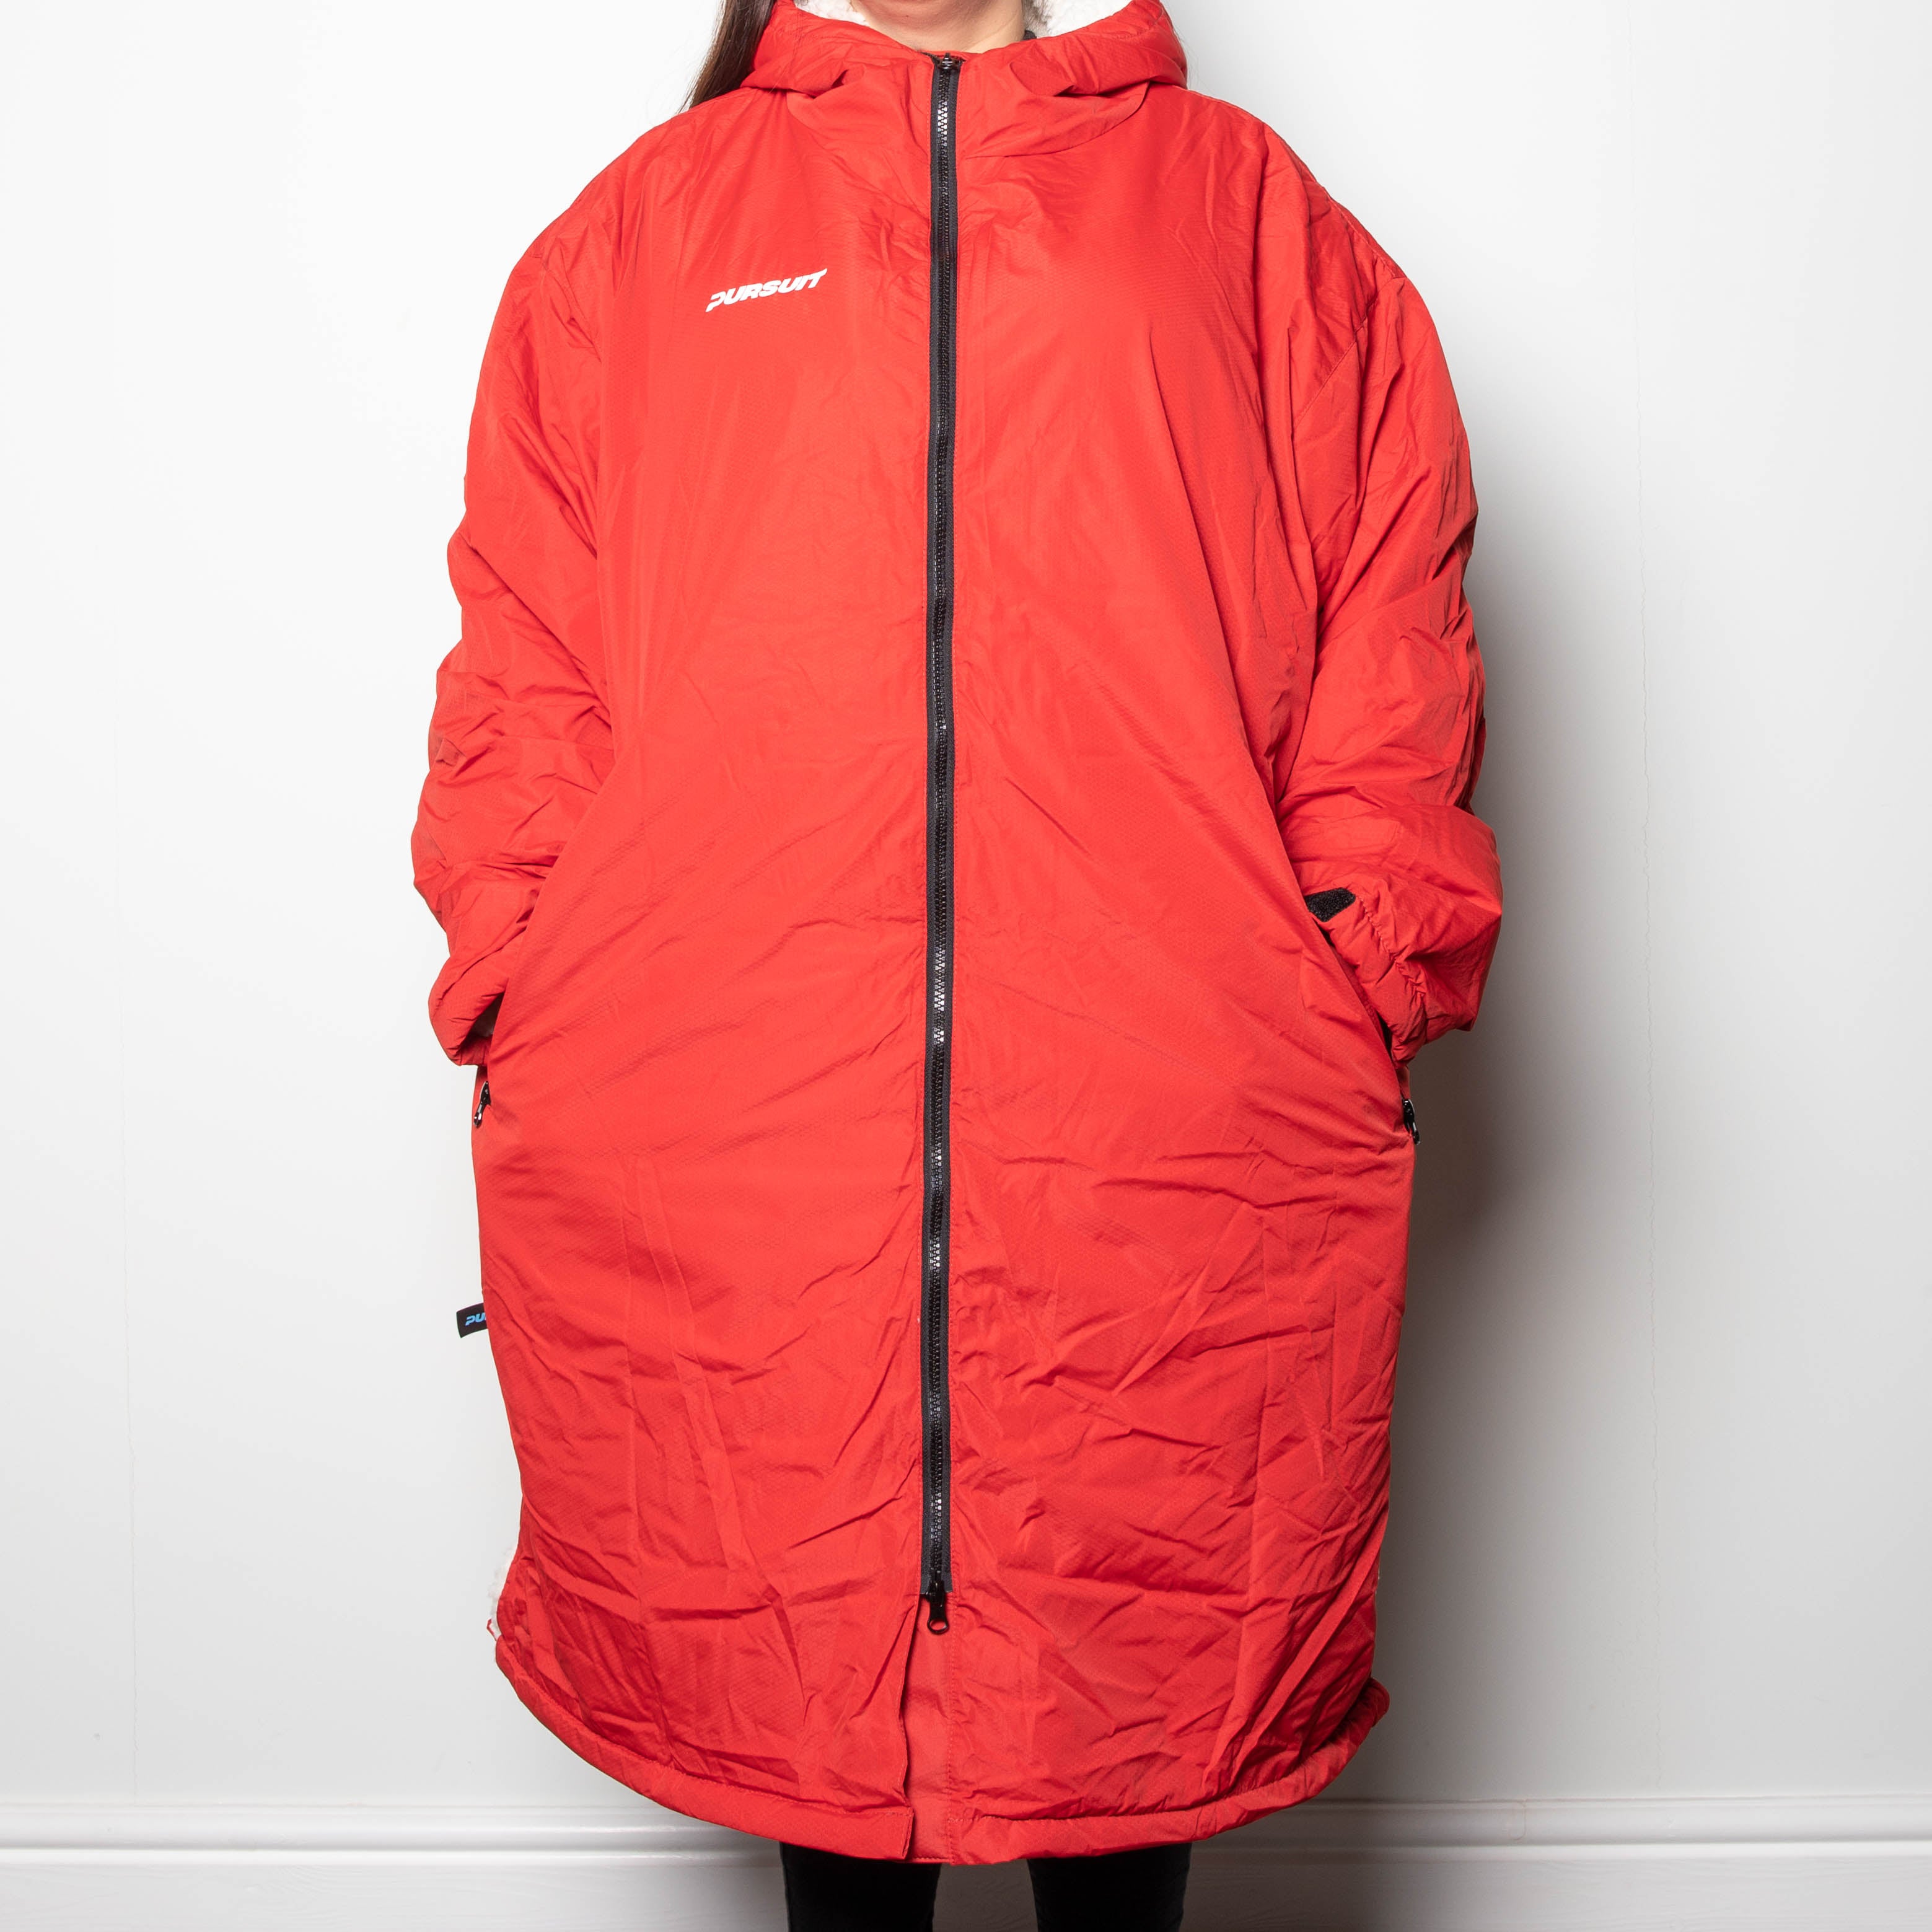 Oversized Adult Waterproof Active Dry Robe with Fleece Lining and Travel Bag in Red